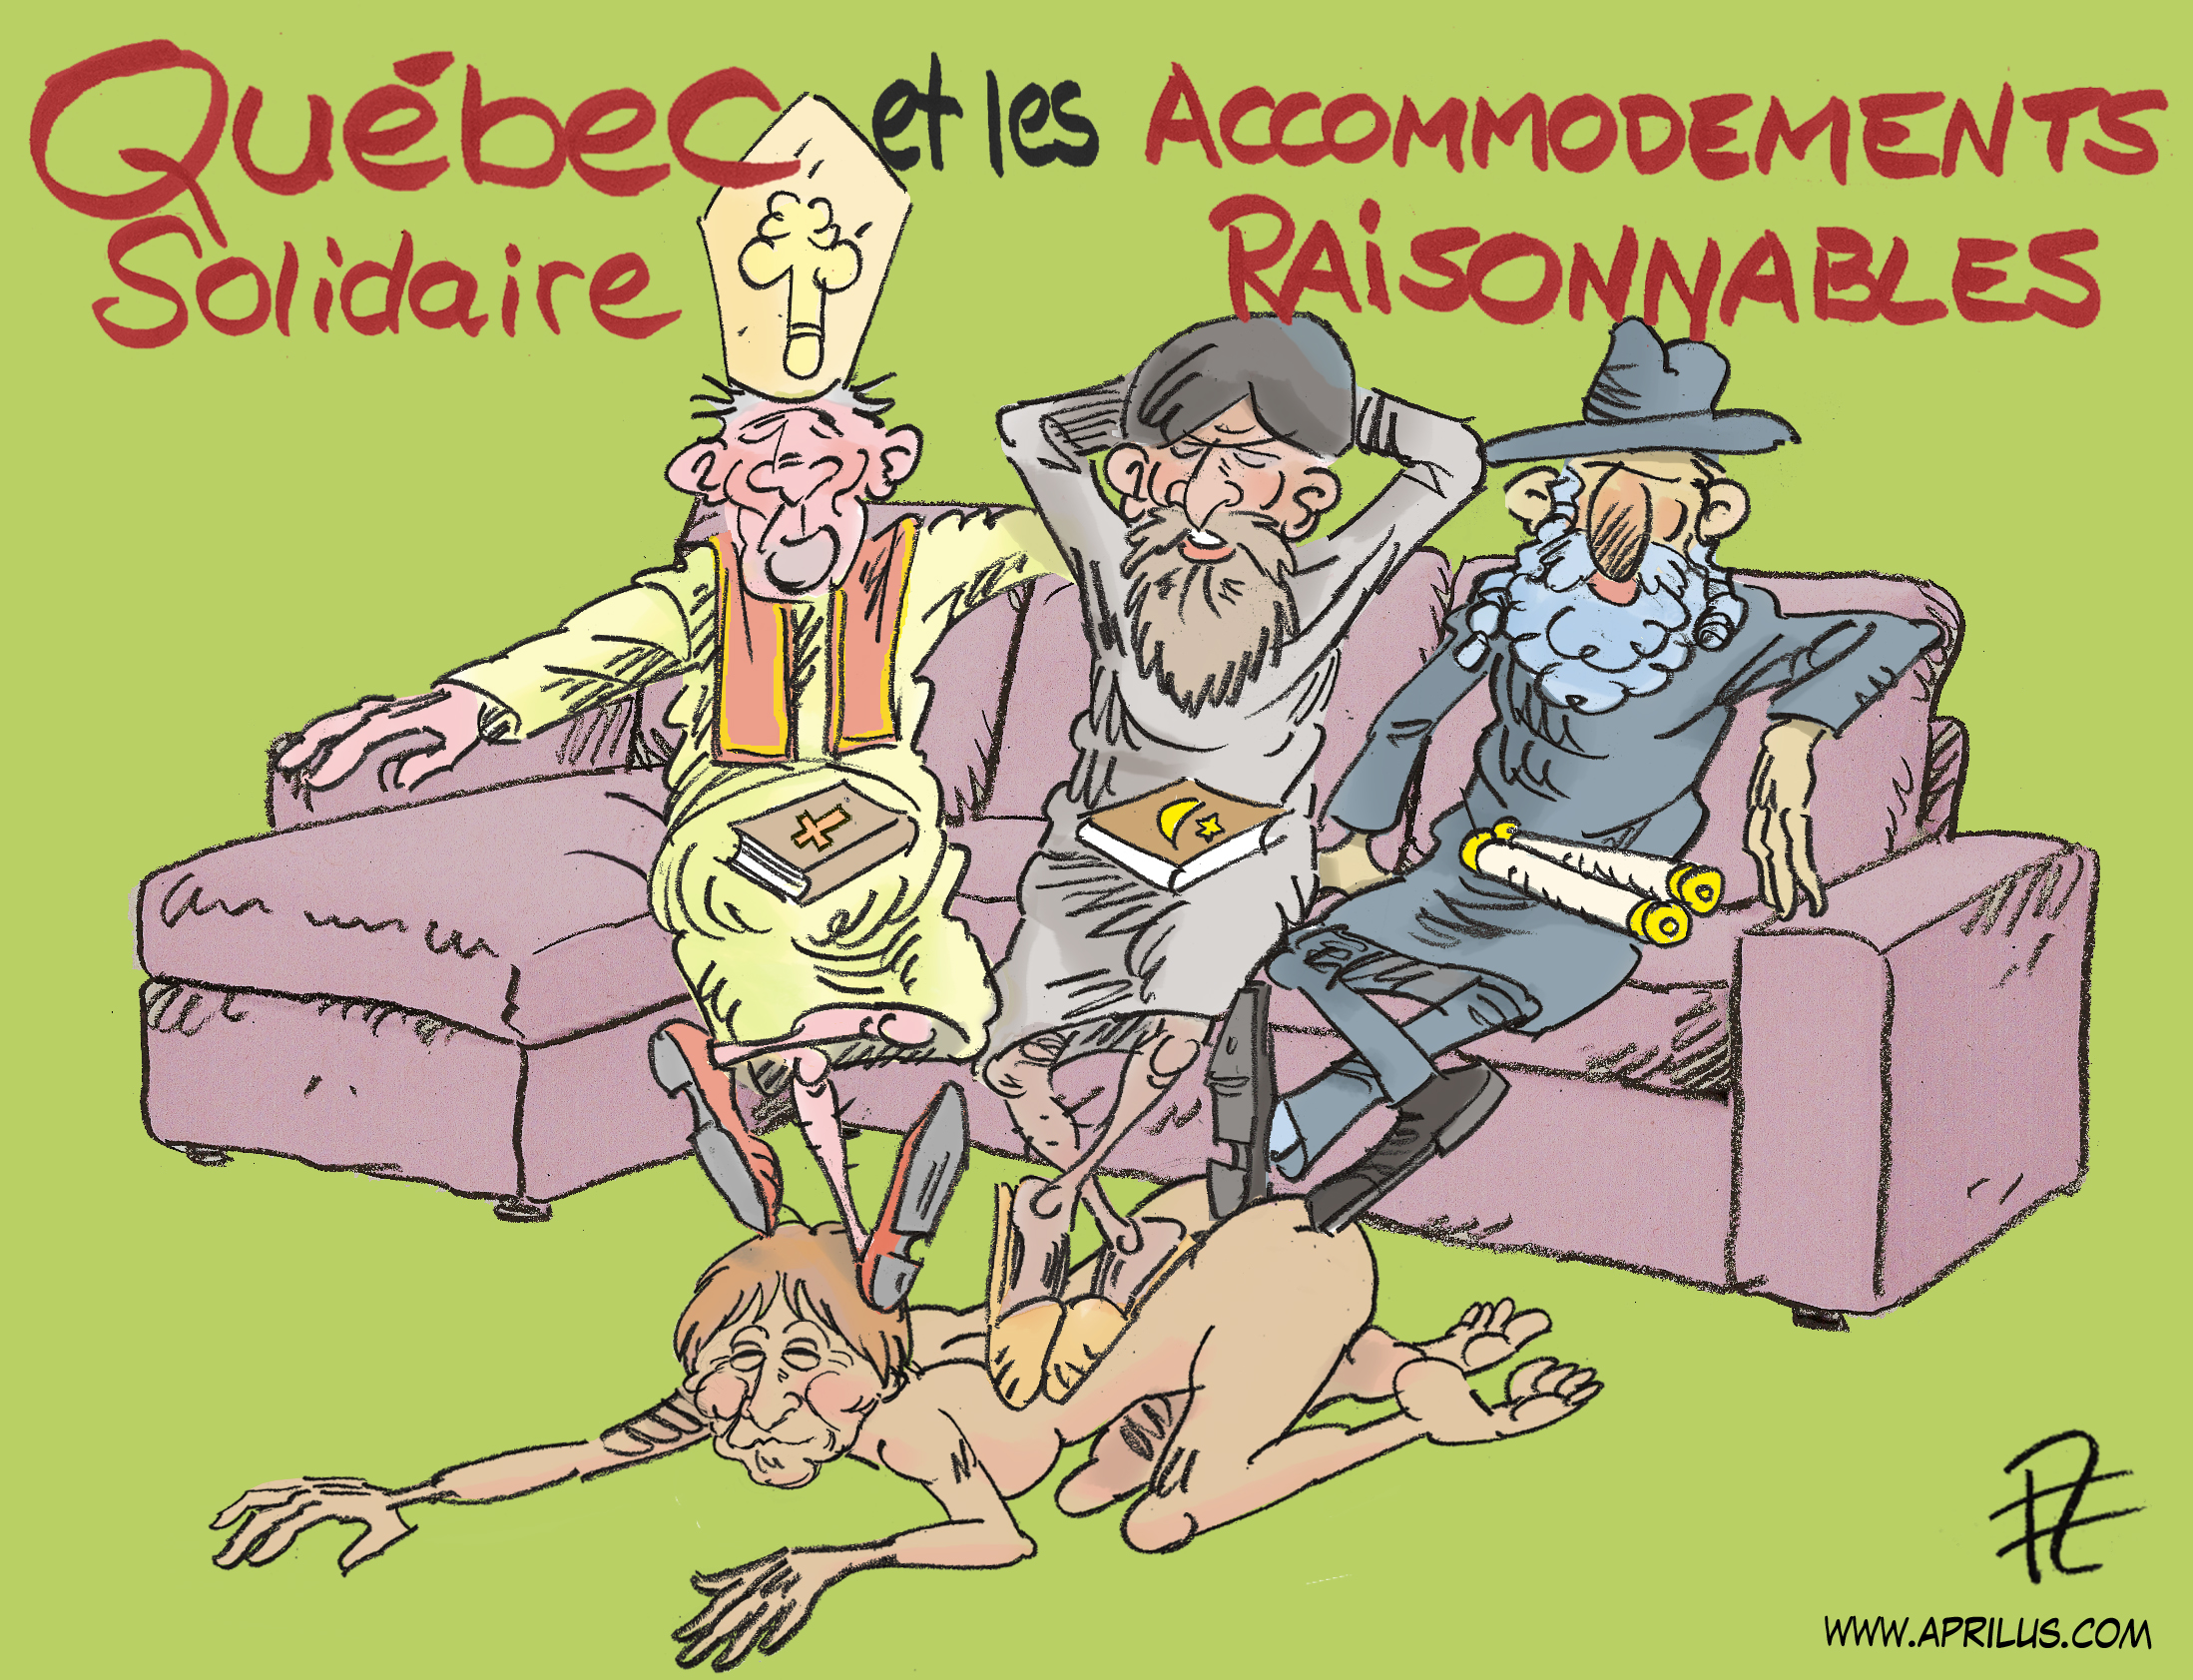 QuebecSolidaireaccommodements